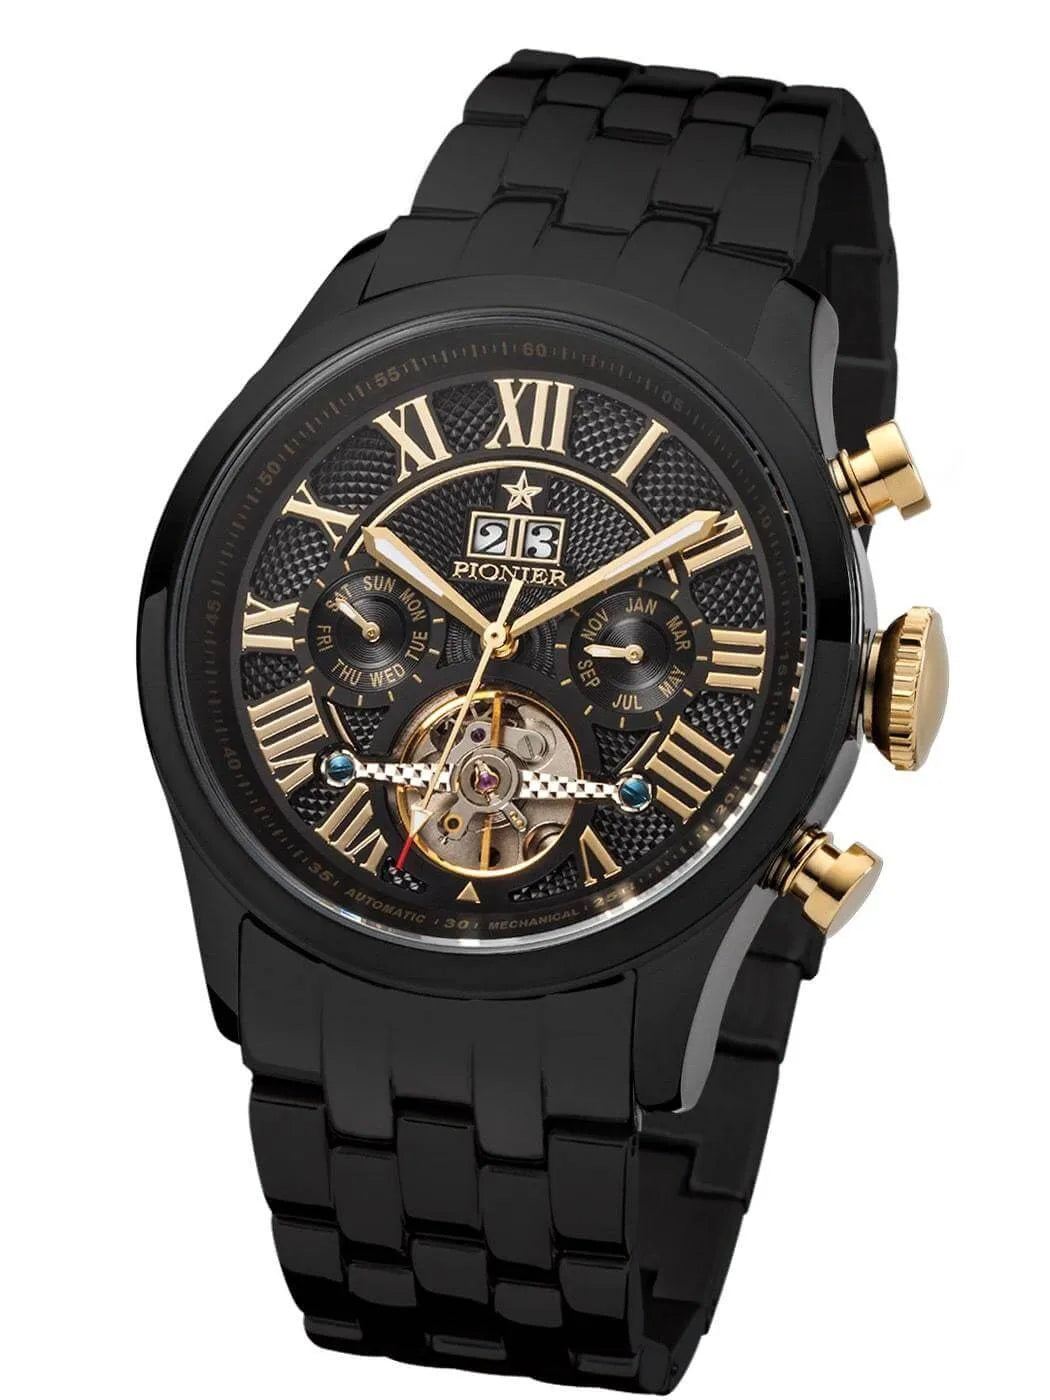 Black dial with Roman numerals with black case.